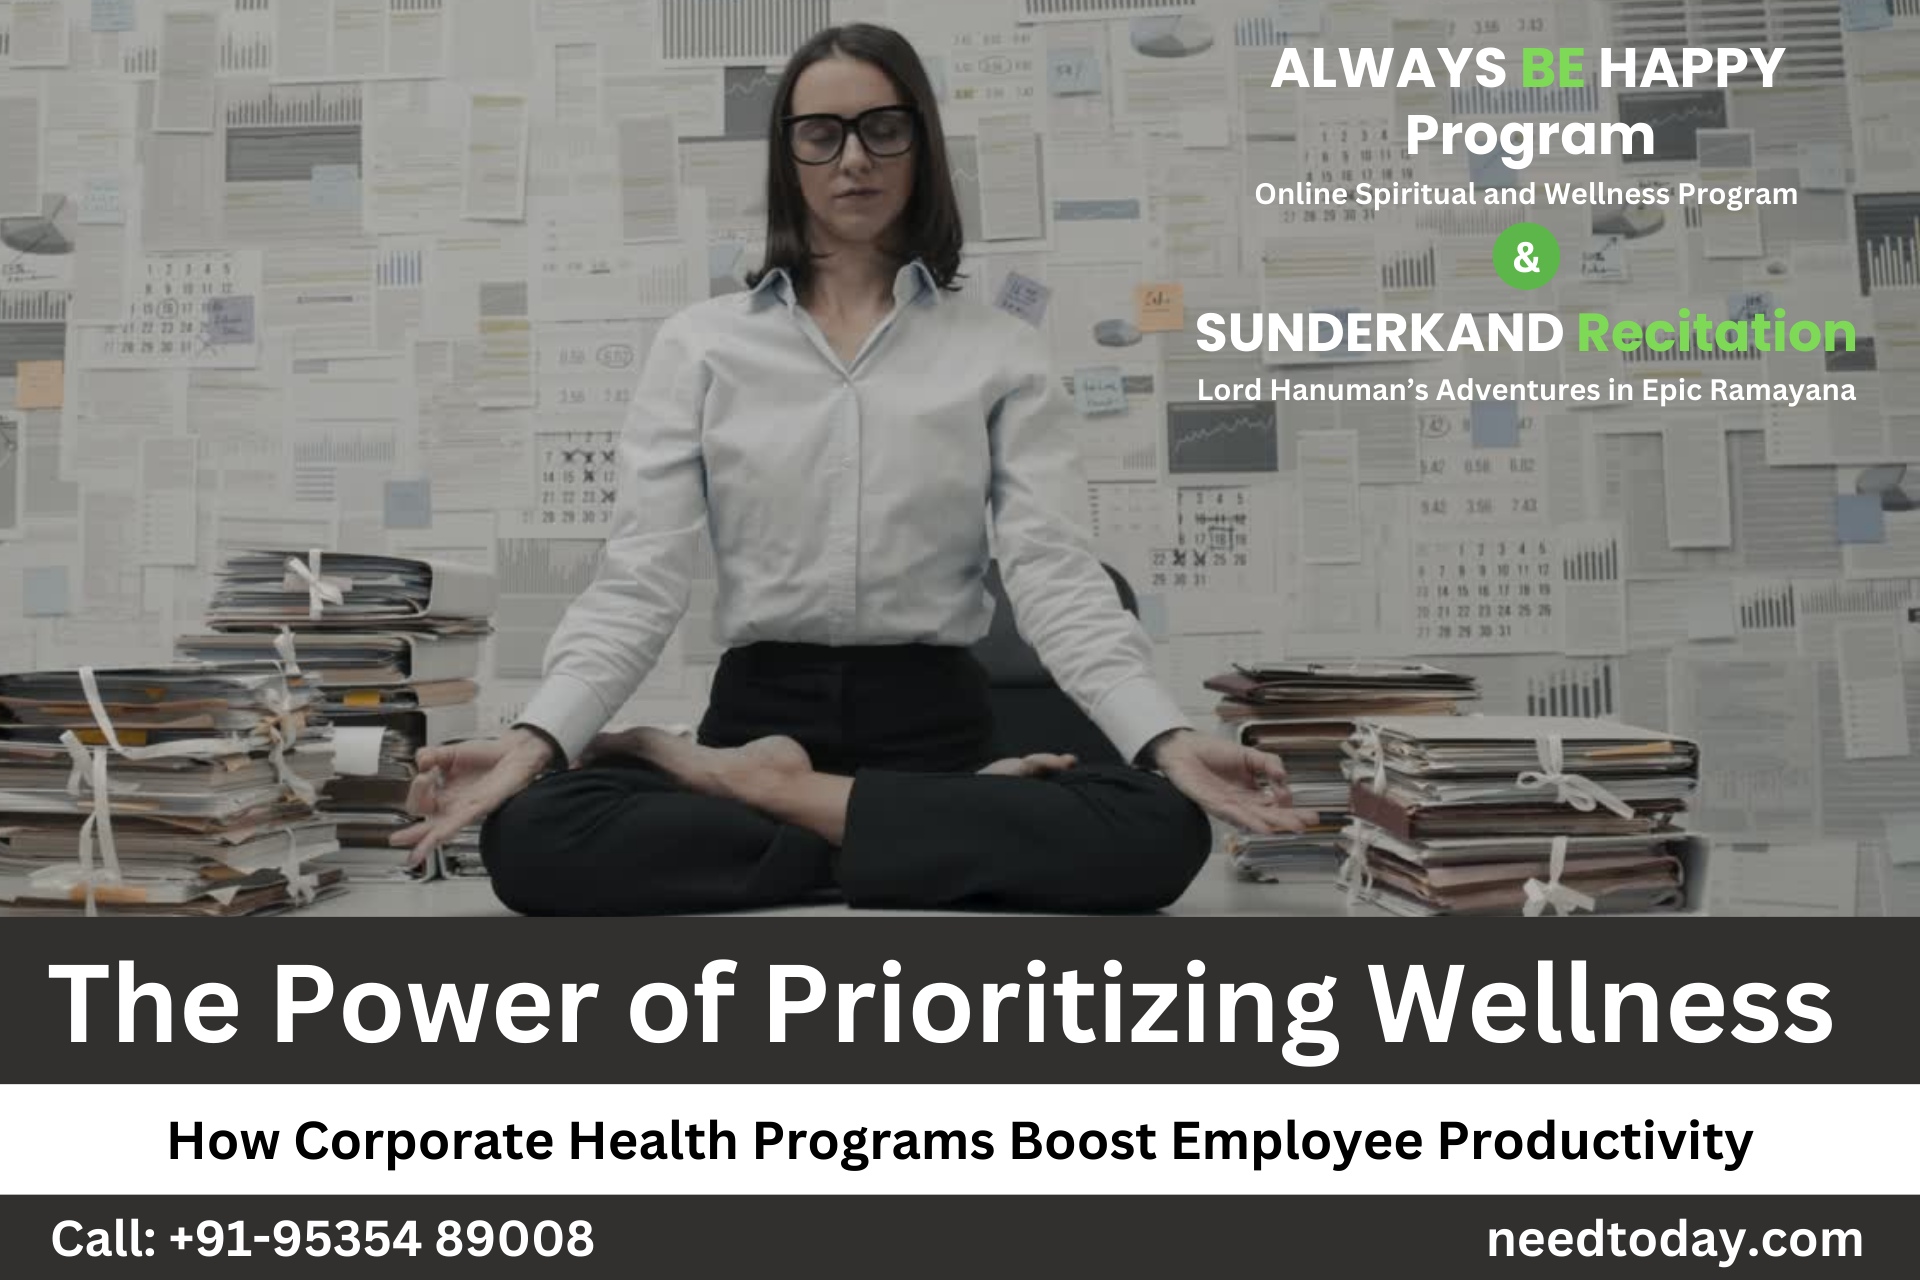 The Power of Prioritizing Wellness: How Corporate Health Programs Boost Employee Productivity